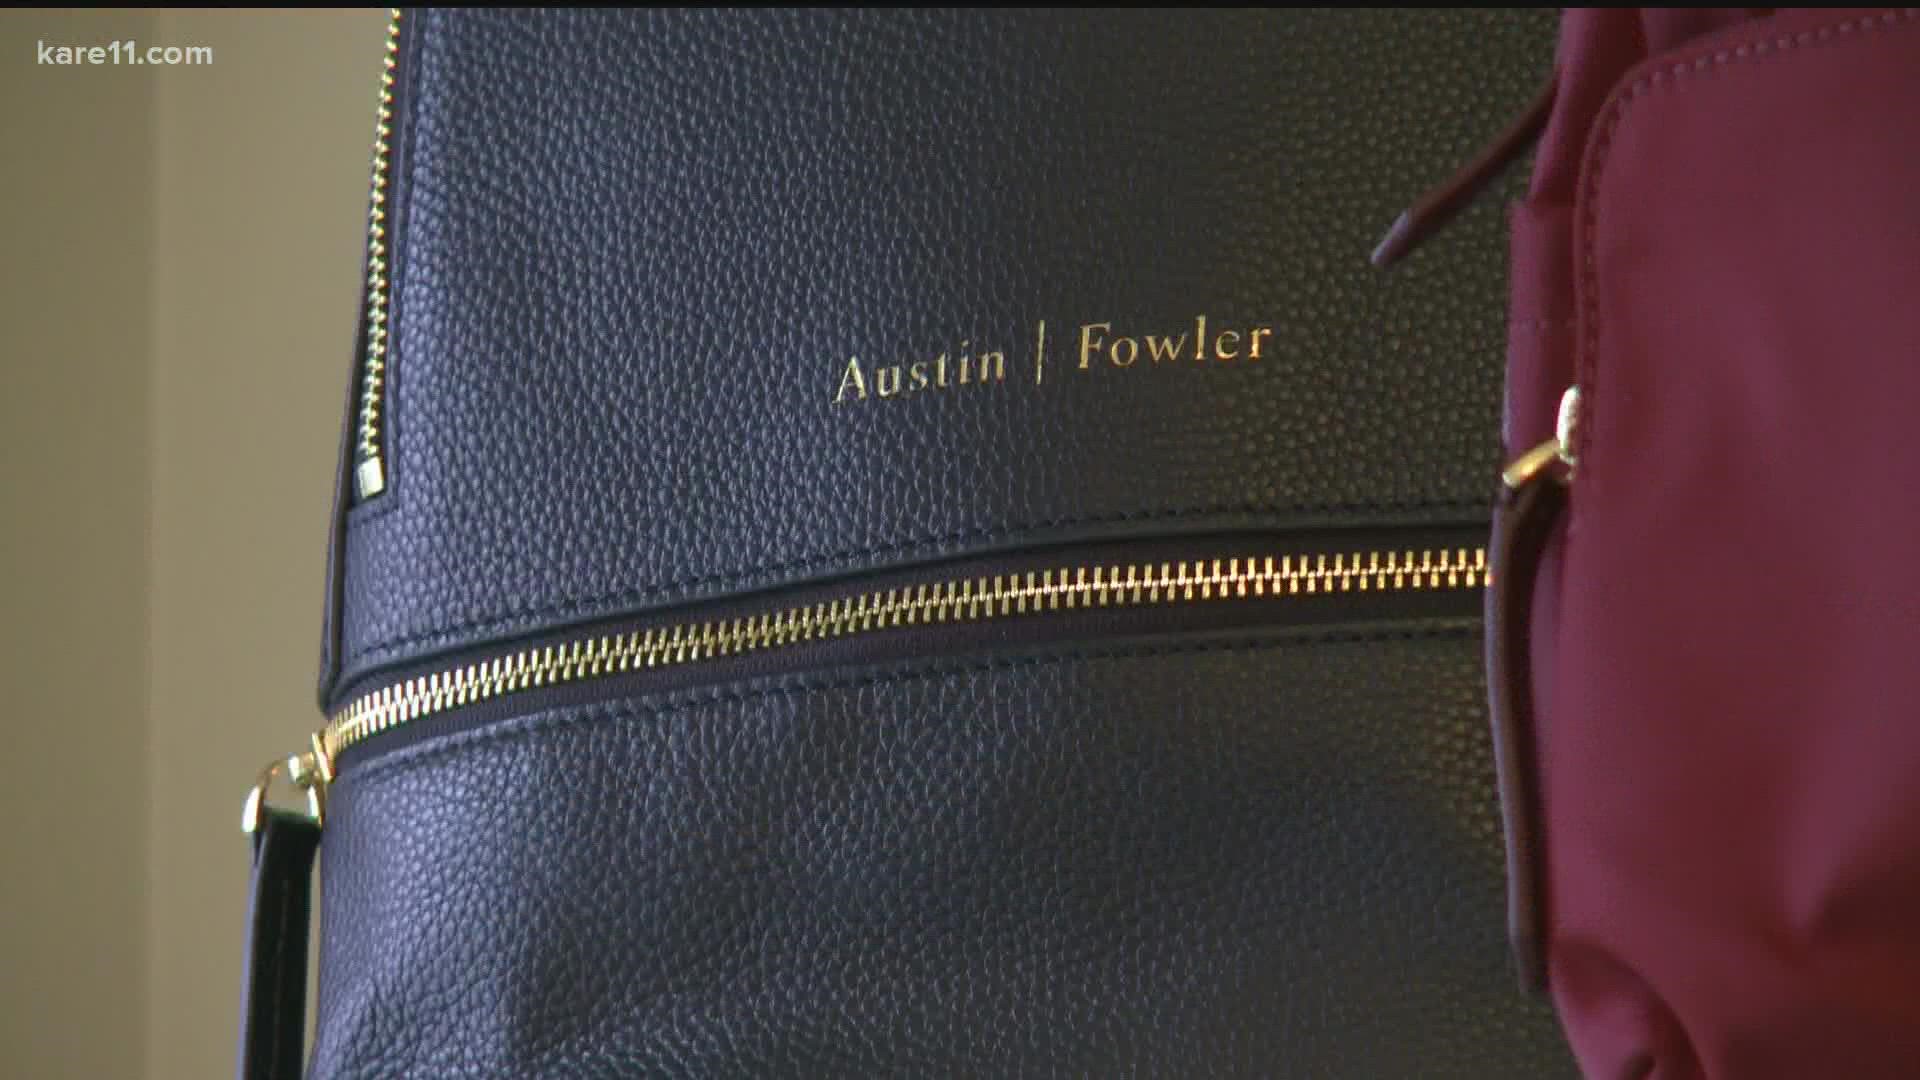 Stephanie and Vince Fowler started "Austin | Fowler" to create stylish bags that could also simplify women's busy lives on the go.